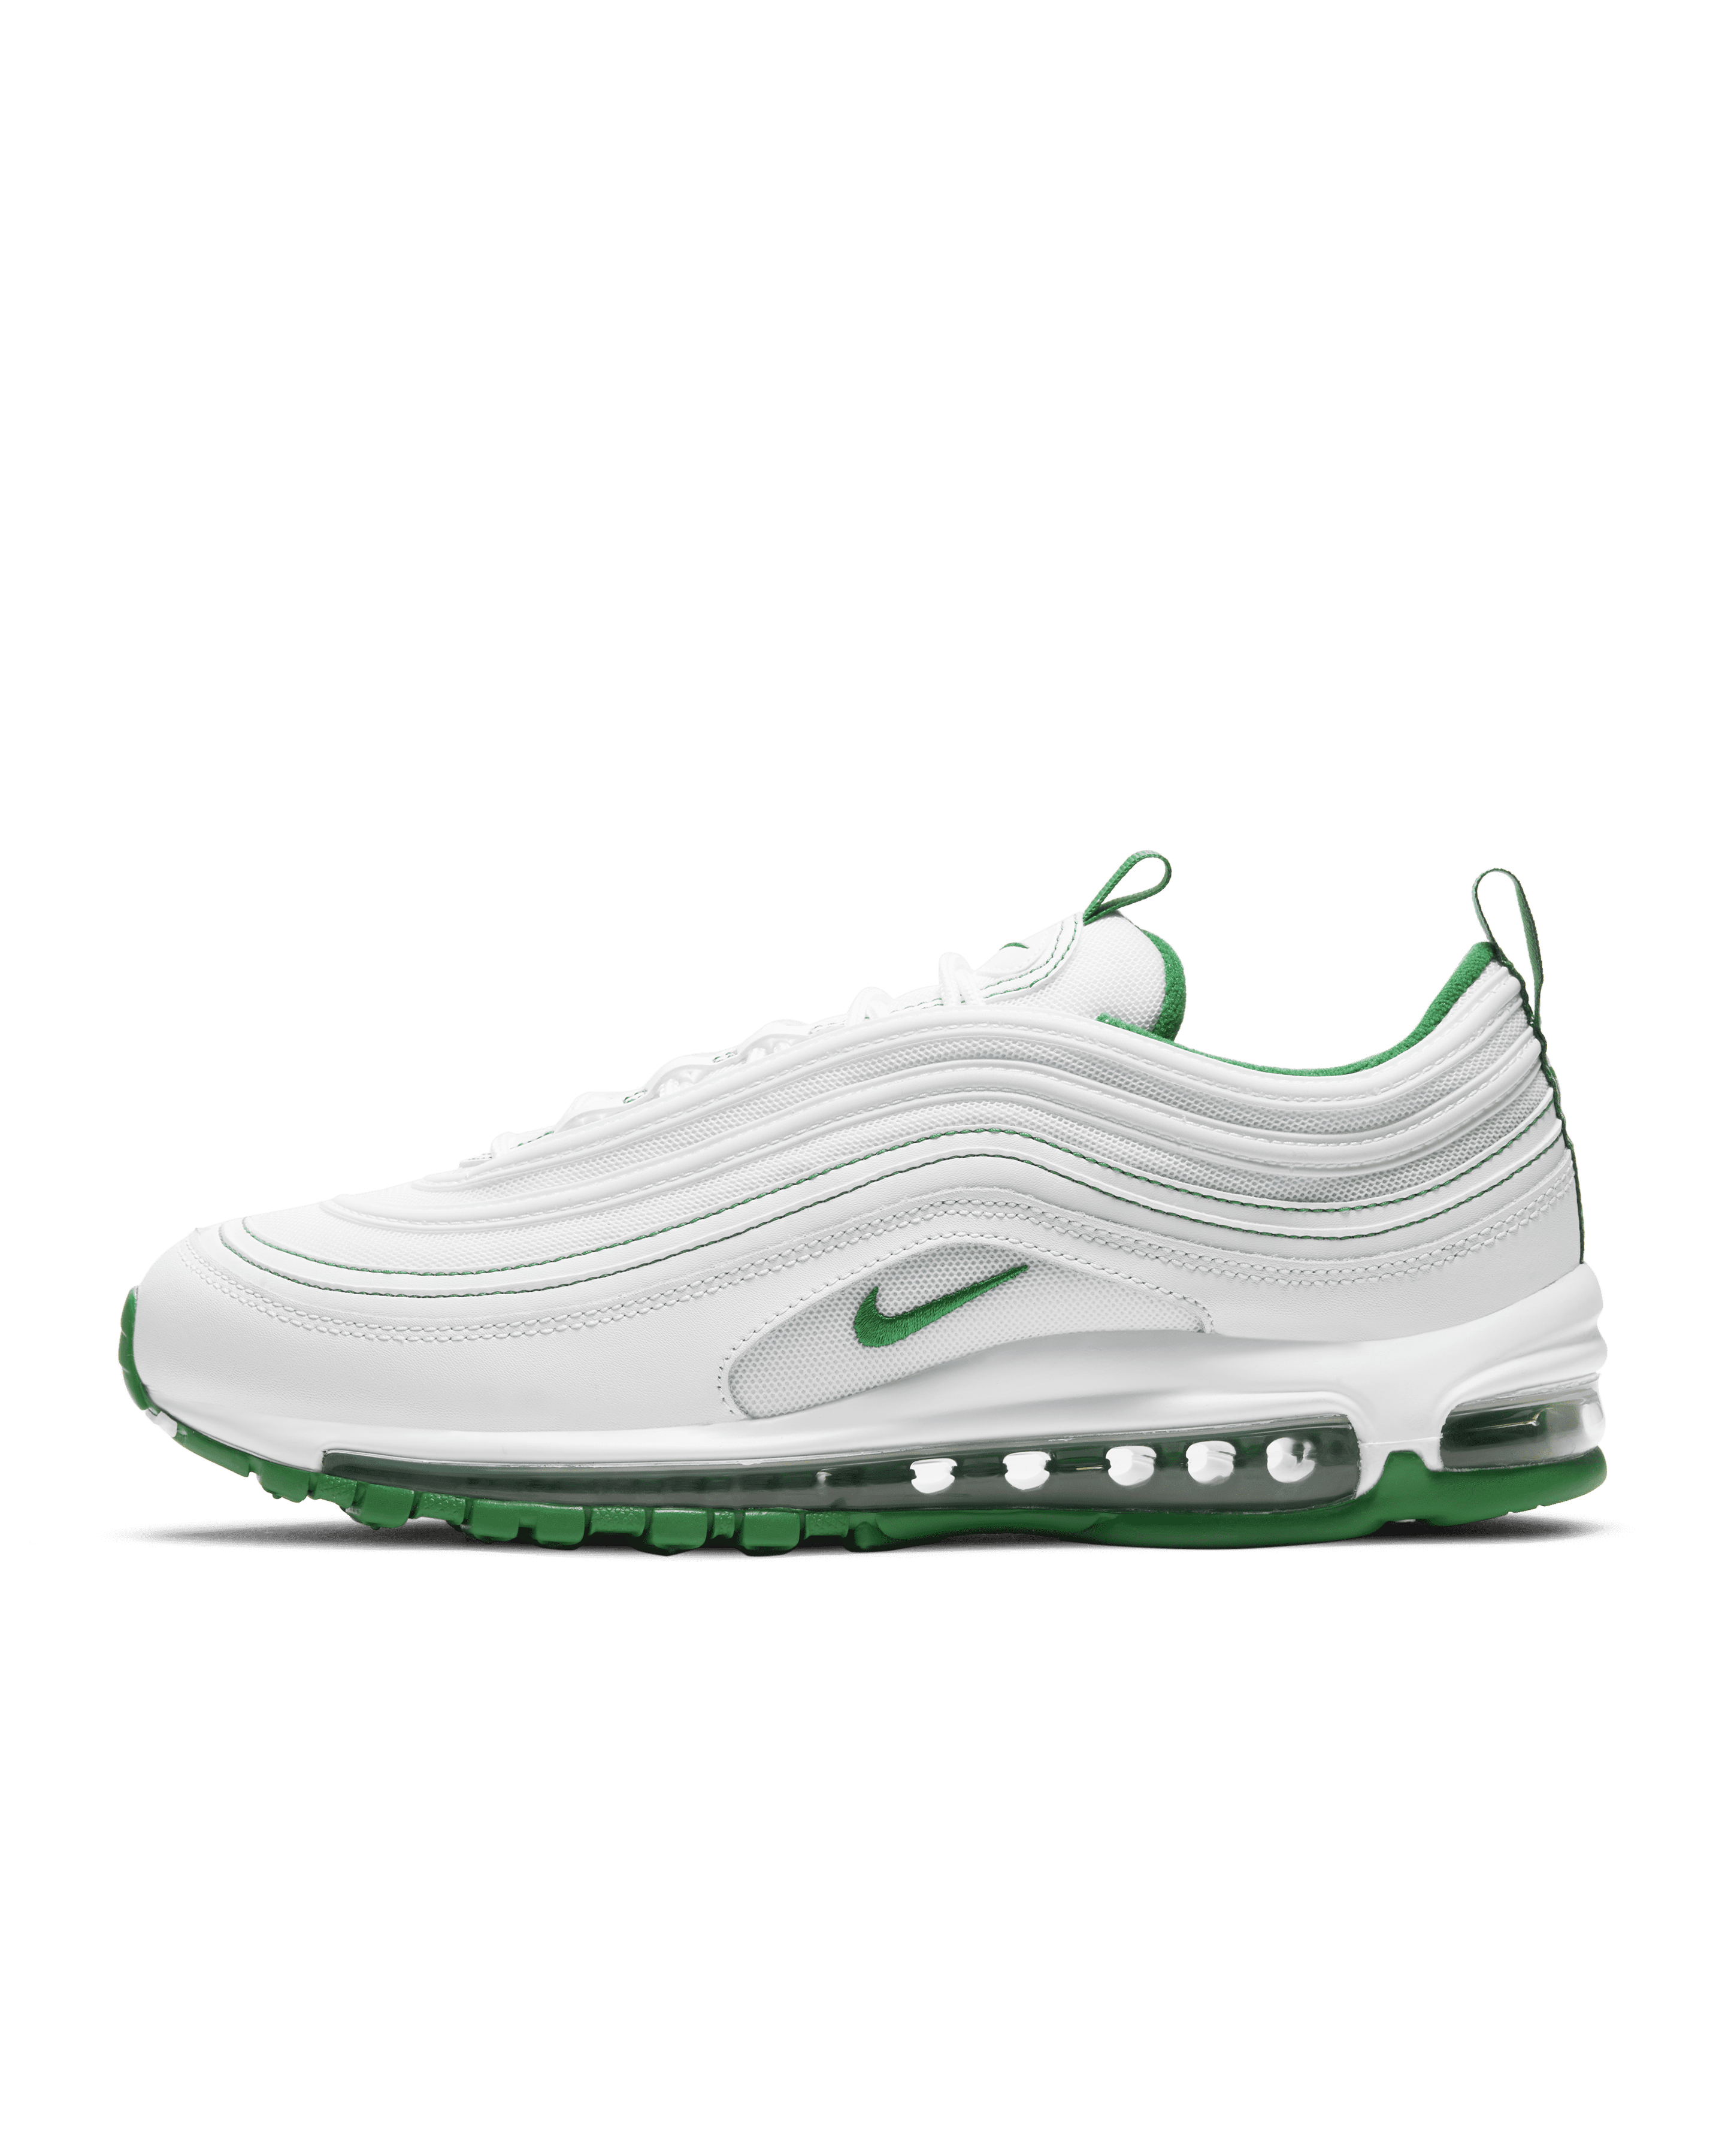 Nike Air Max Day 2021- Here's 